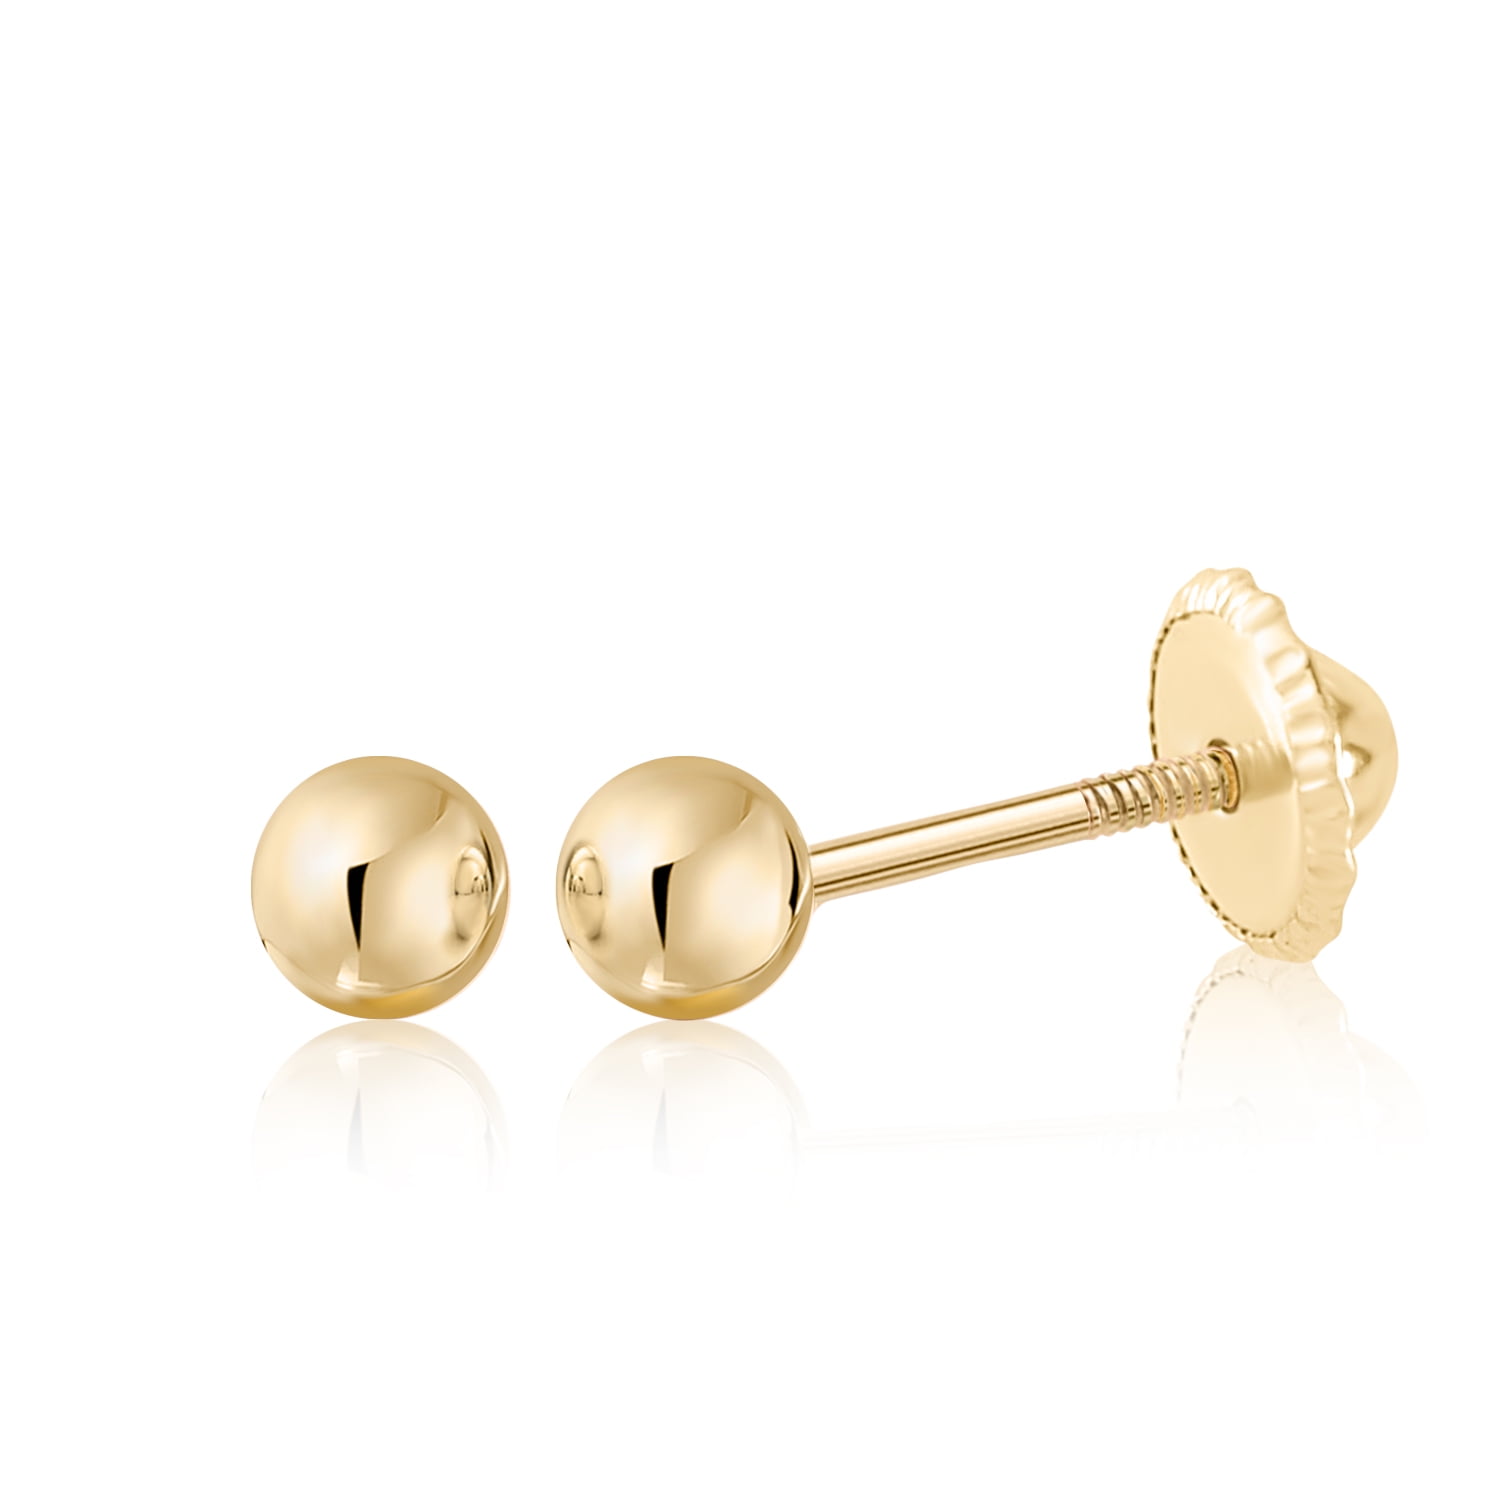 Genuine 14k Yellow Gold Polished 5mm Ball Post Earrings 5 x5mm